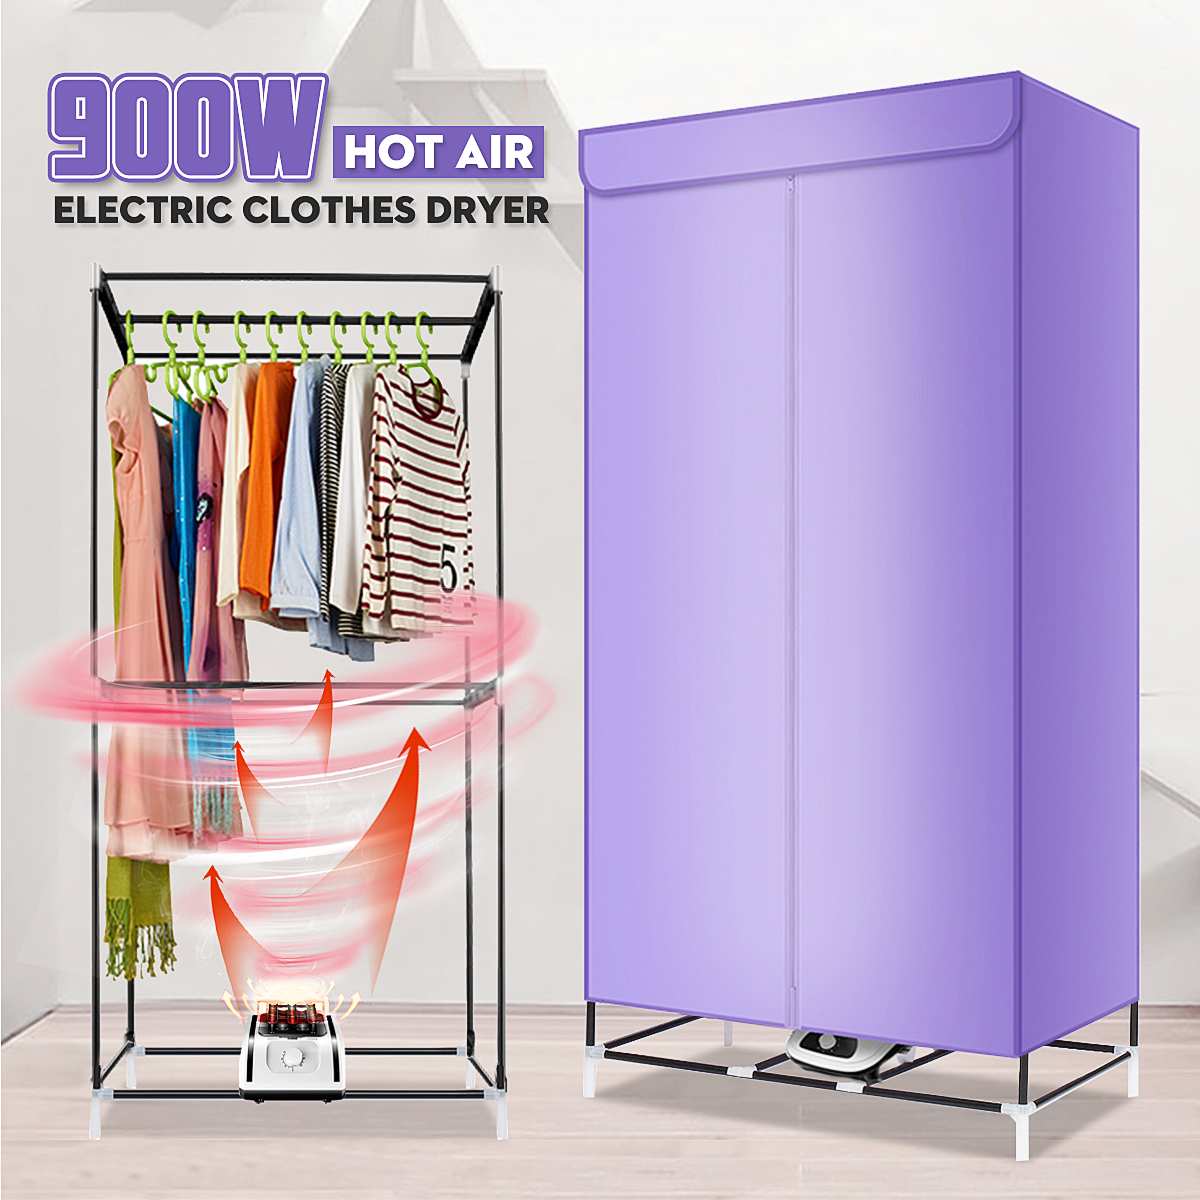 900W 220V Electric Cloth Dryer Household Portable Baby Cloth Shoes Boots Dryer Power Motor Drying Warm wWnd Laundry Garment